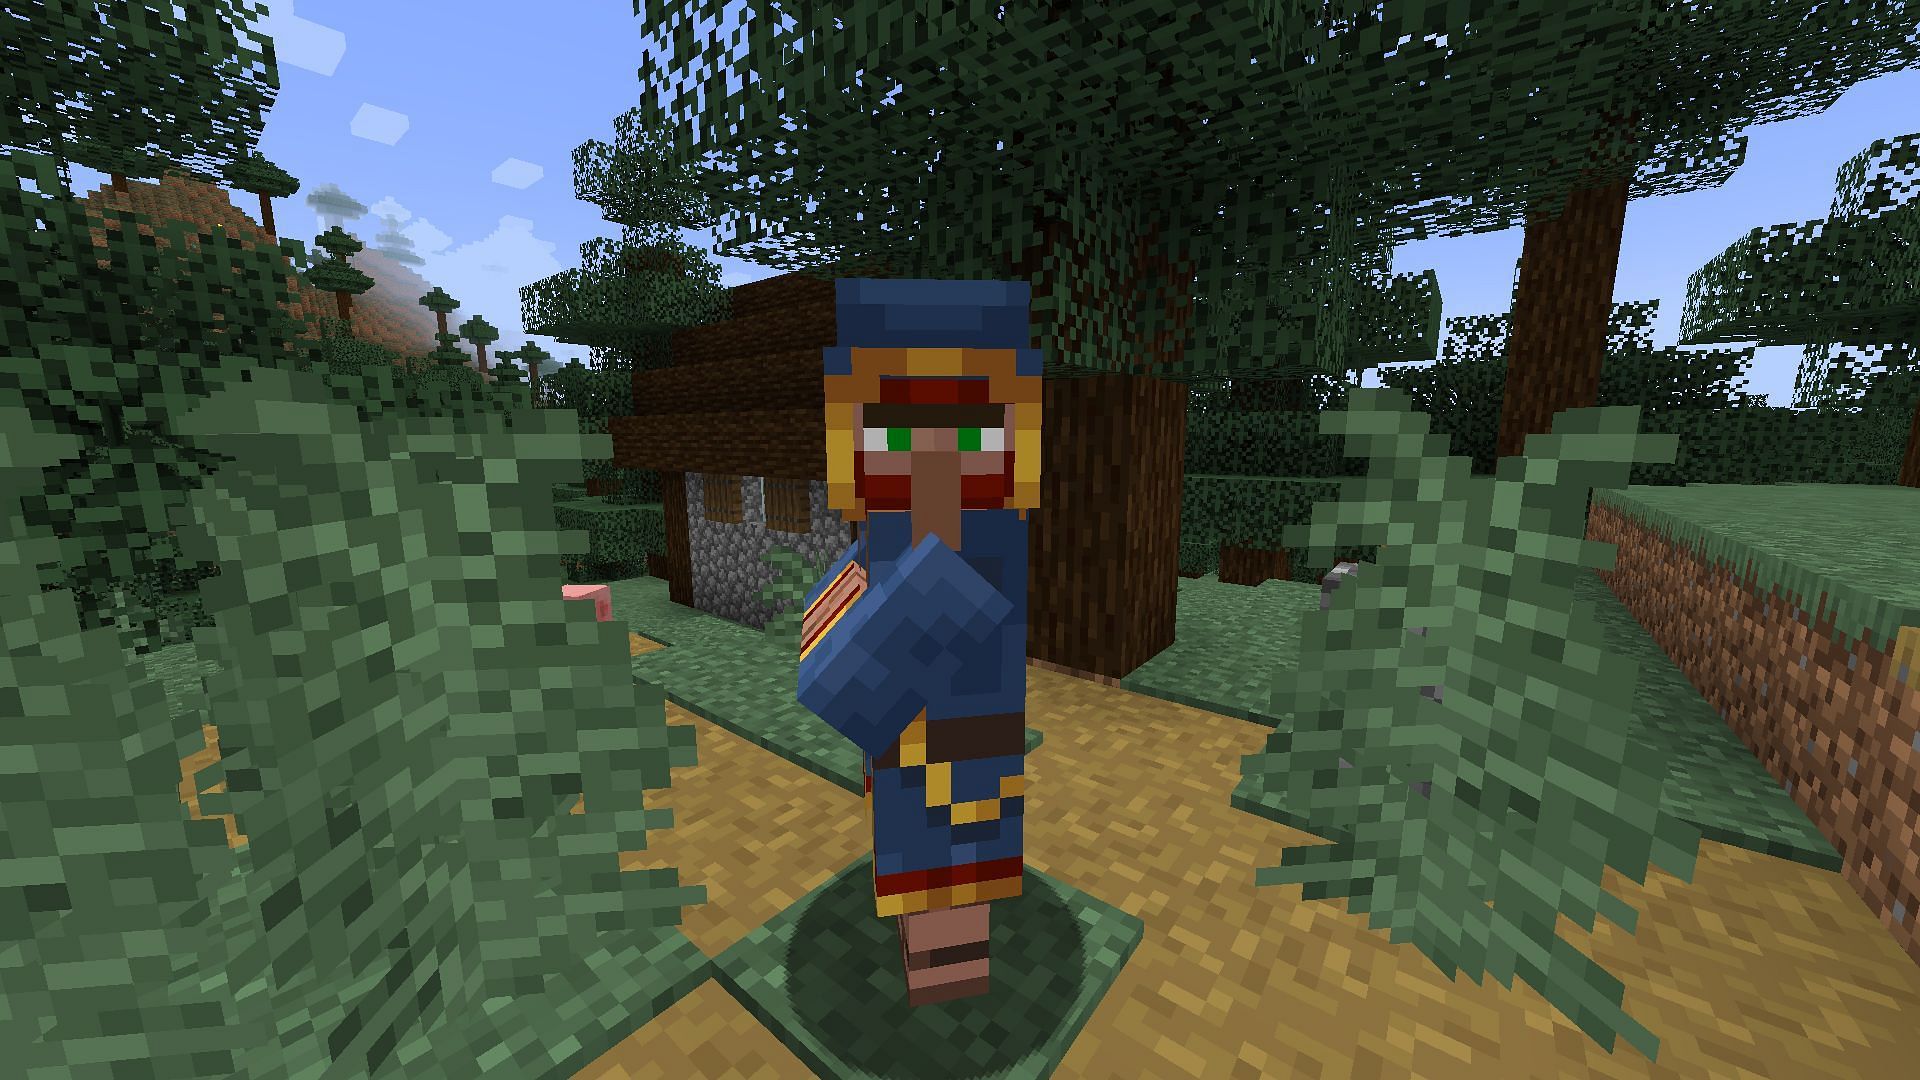 Wandering traders offer all kinds of item in Minecraft (Image via Mojang)